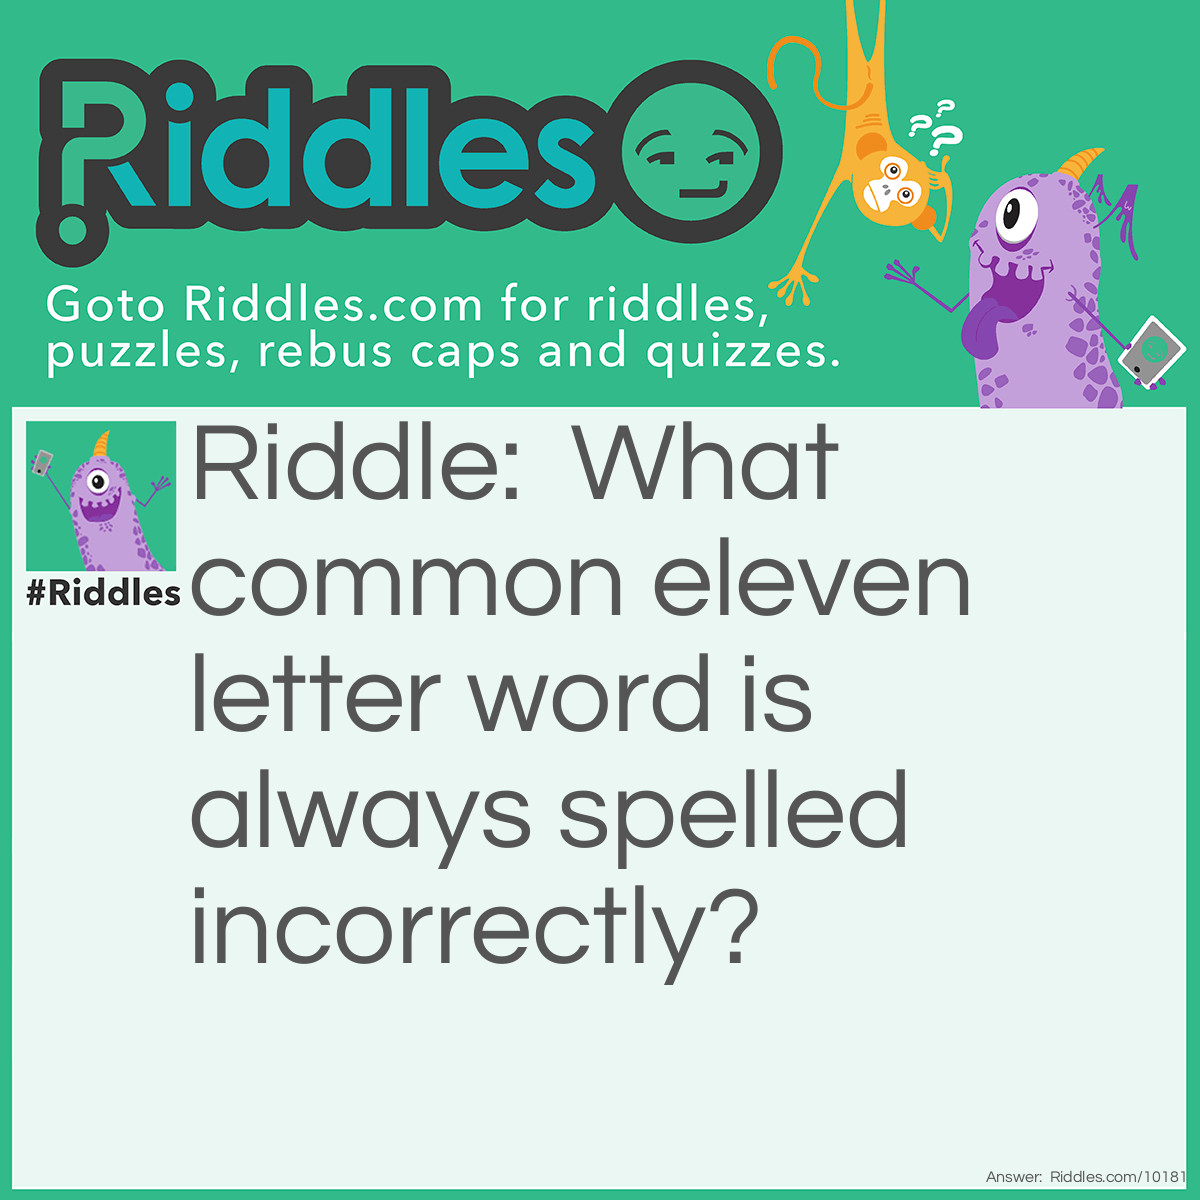 Riddle: What common eleven-letter word is always spelled incorrectly? Answer: incorrectly.